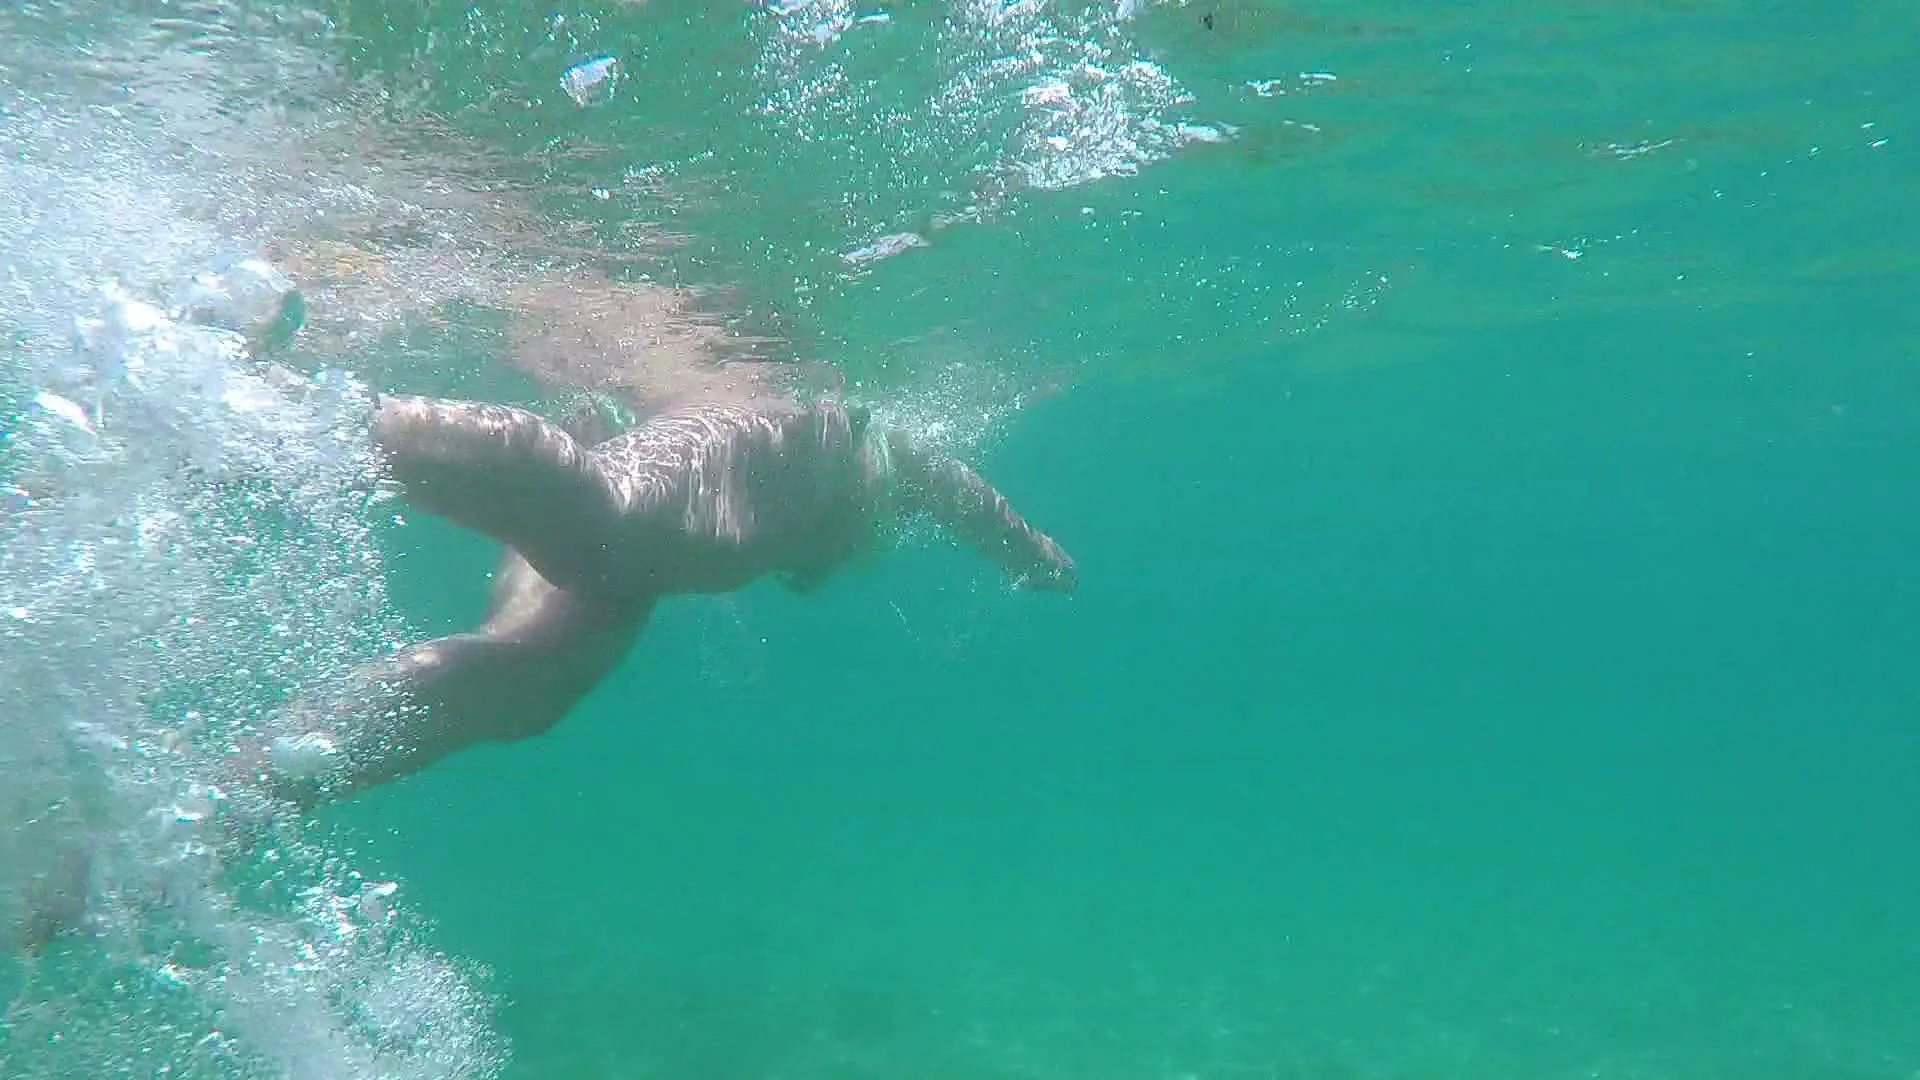 Swim In The World's Clearest Water